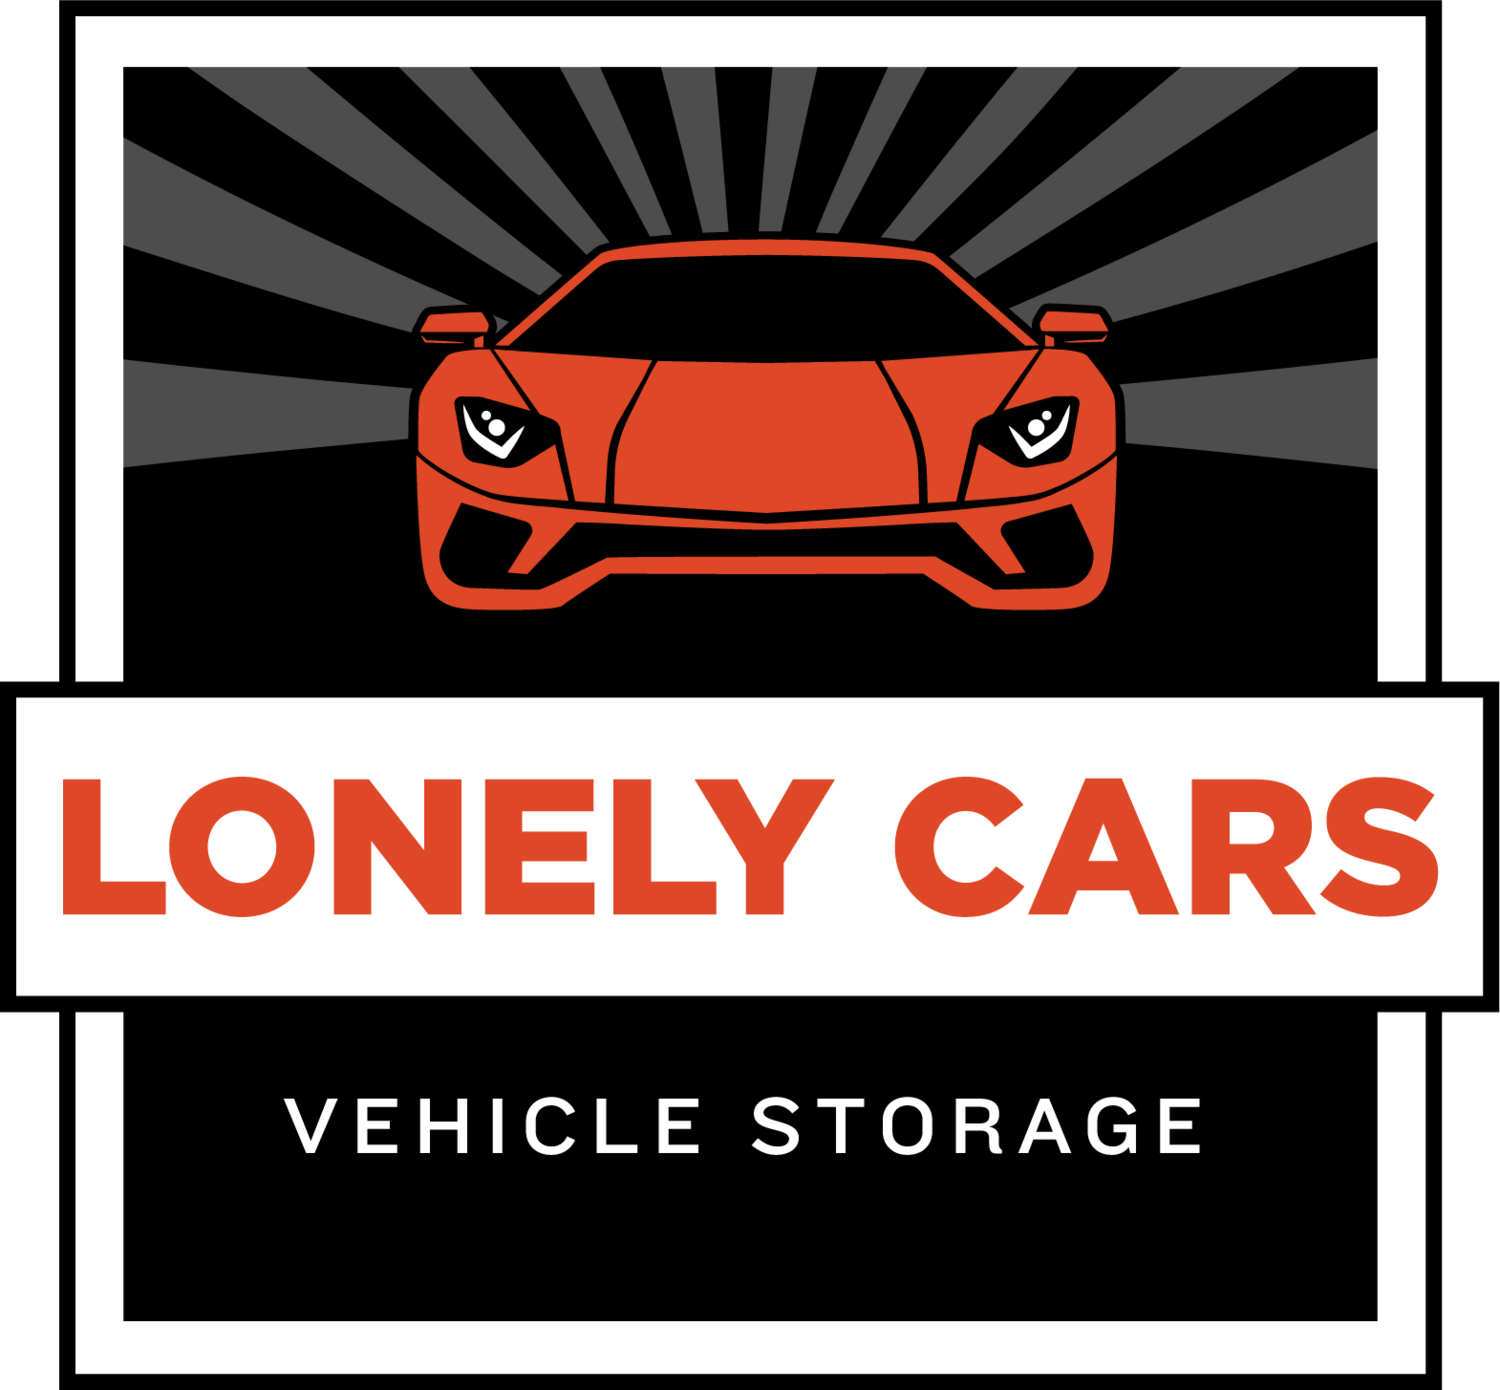 Lonely Cars Indoor Heated Vehicle Storage